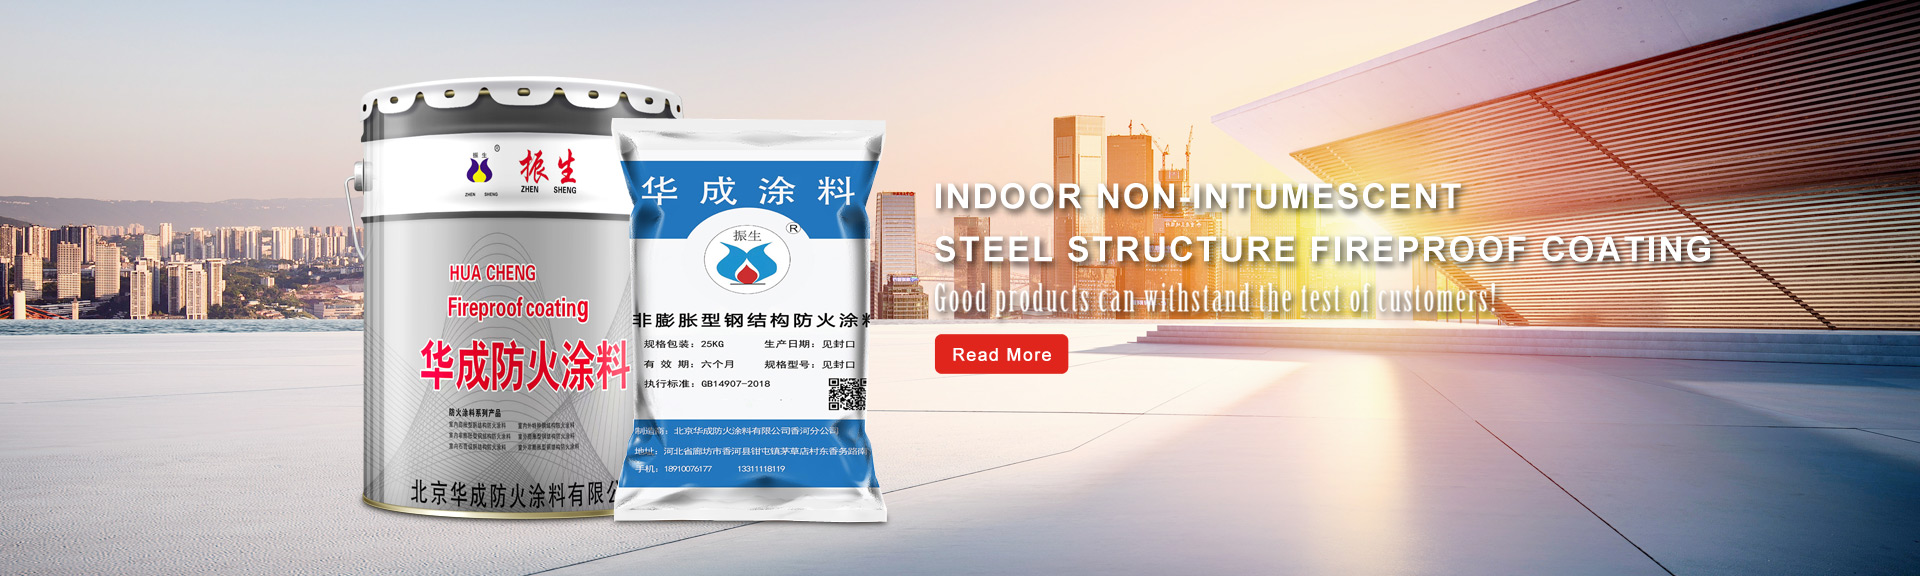 China Fireproof Coatings For Steel Structures Manufacturers